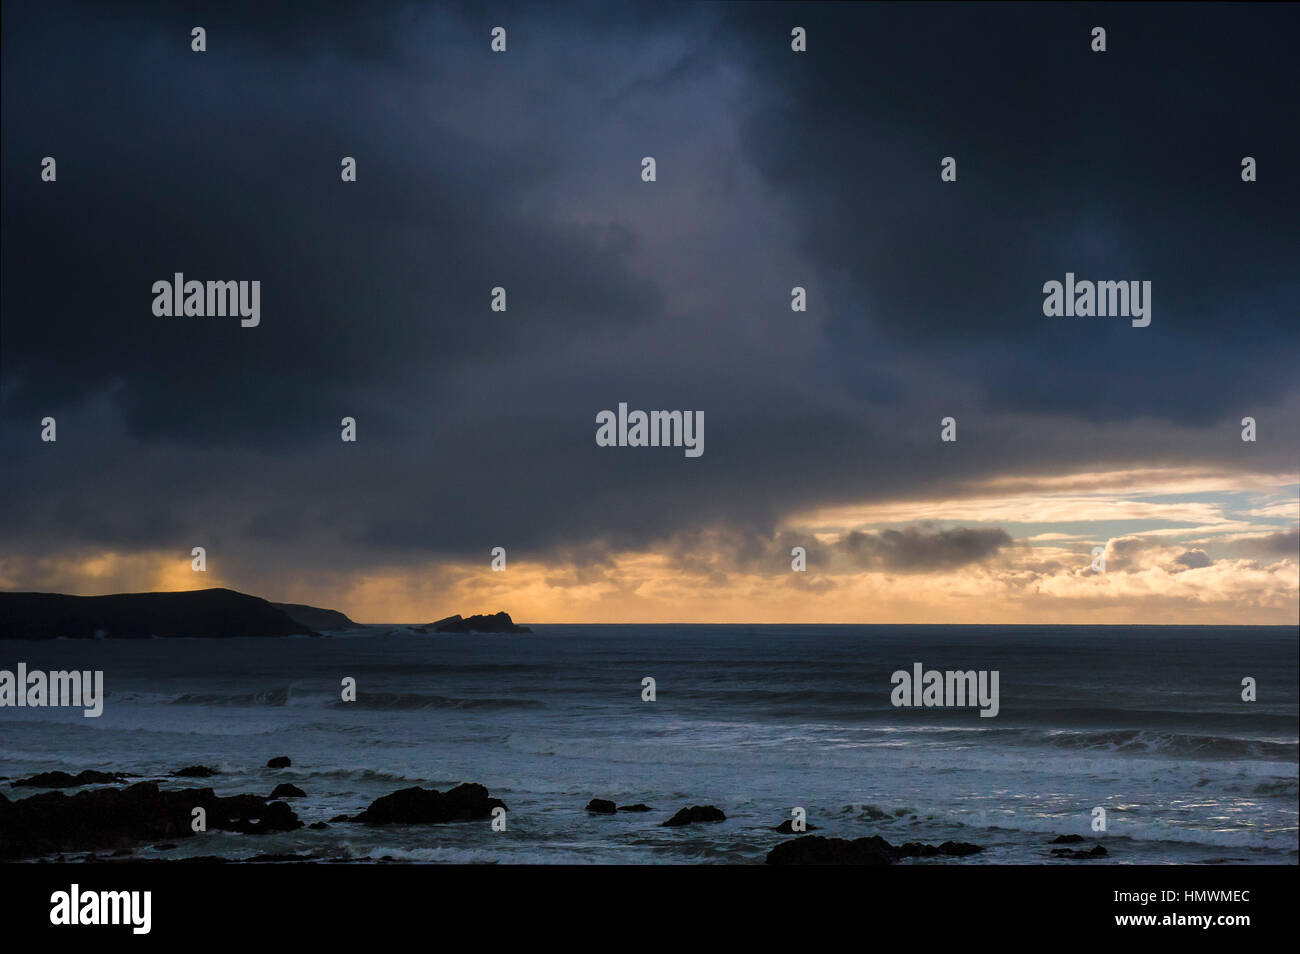 Dark, threatening storm clouds pass over the coast of Newquay on the North Cornwall coast.  UK weather. Stock Photo